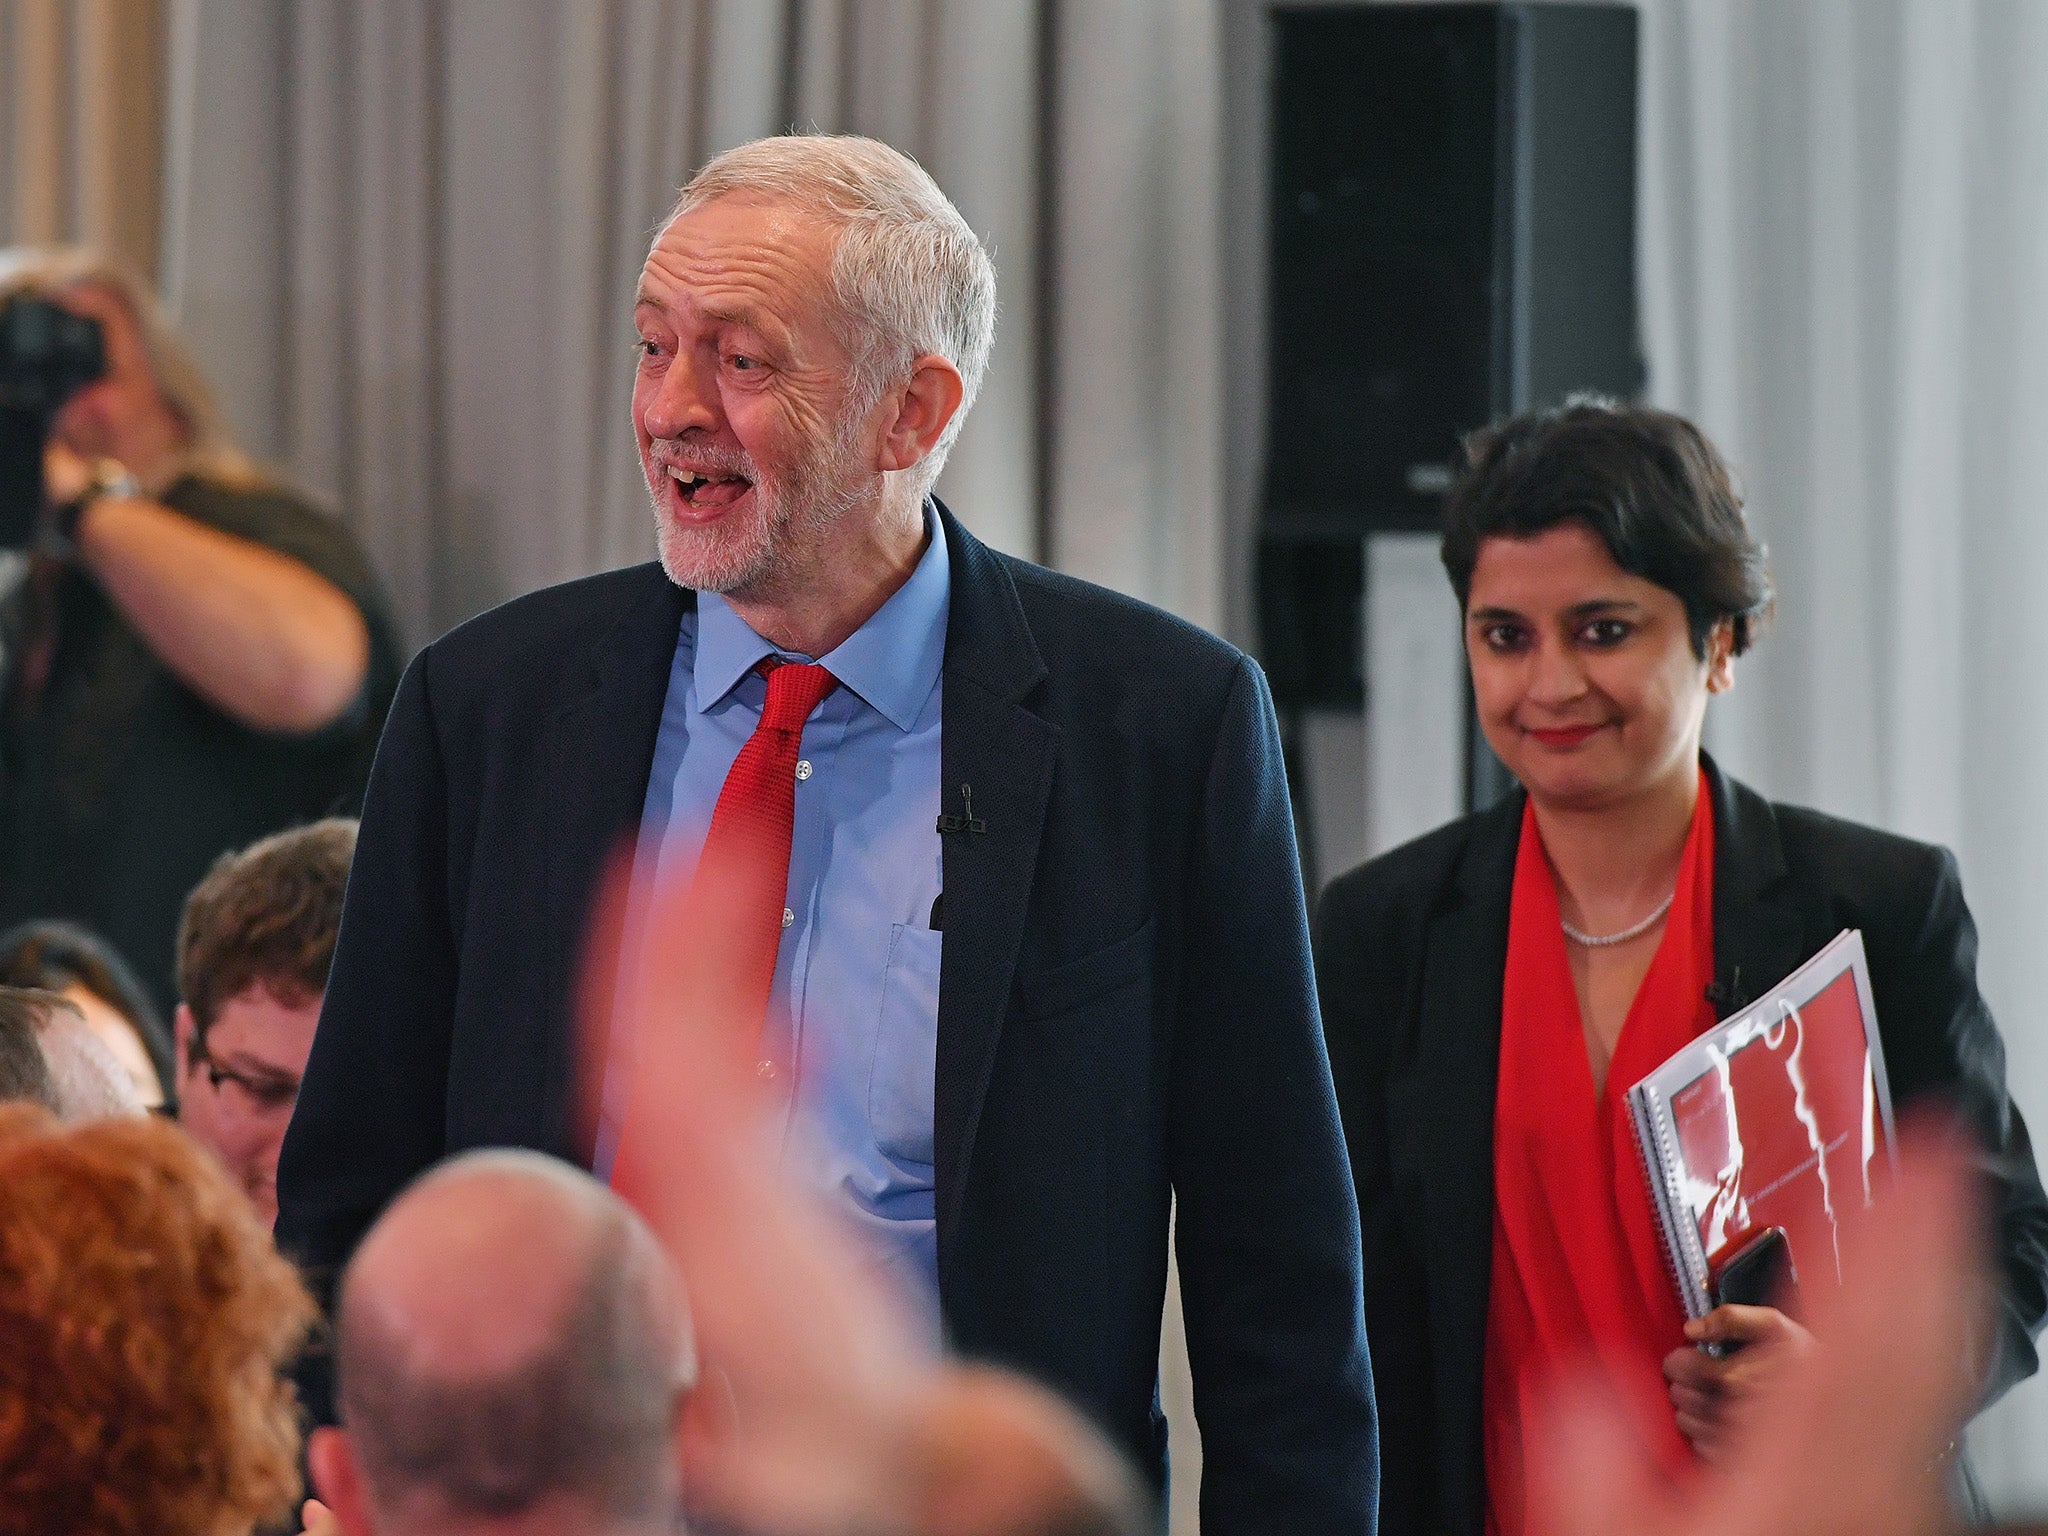 Shami Chakrabarti has been nominated to join the upper house just over a month after she published the anti-semitism report Getty